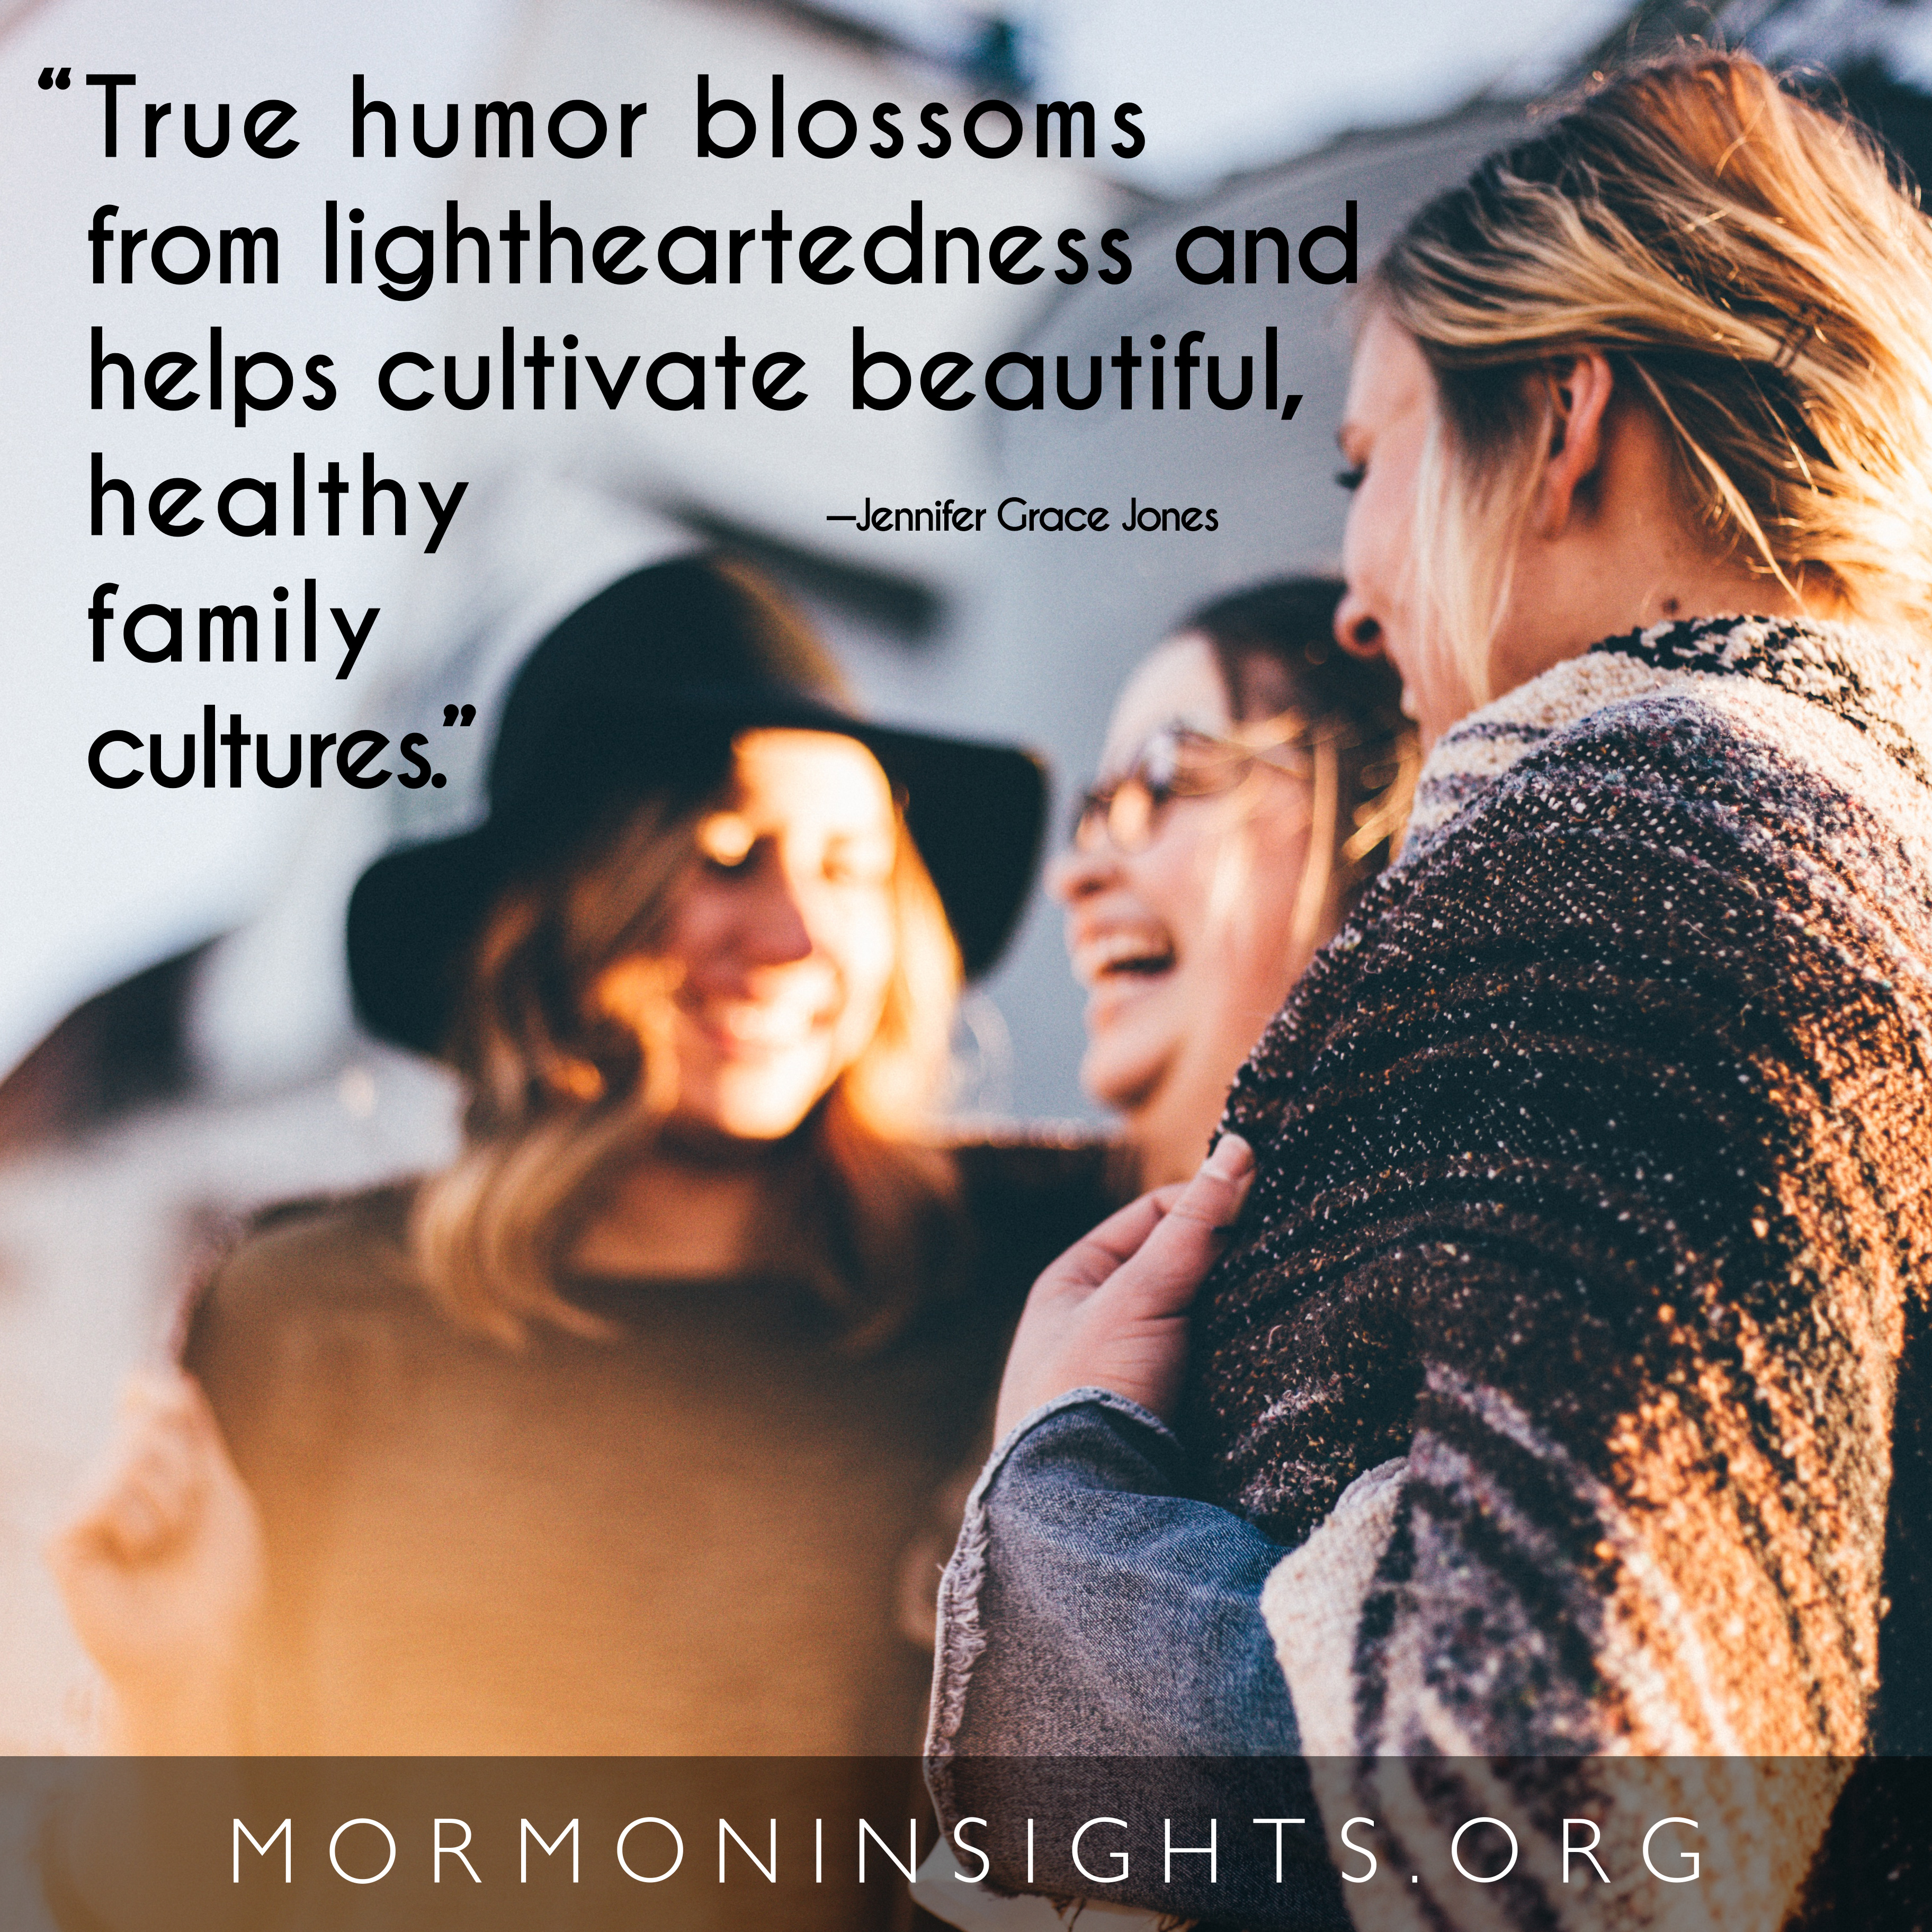 "True humor blossoms from lightheartedness and helps cultivate beautiful, healthy family cultures." Jennifer Grace Jones. Women laughing together